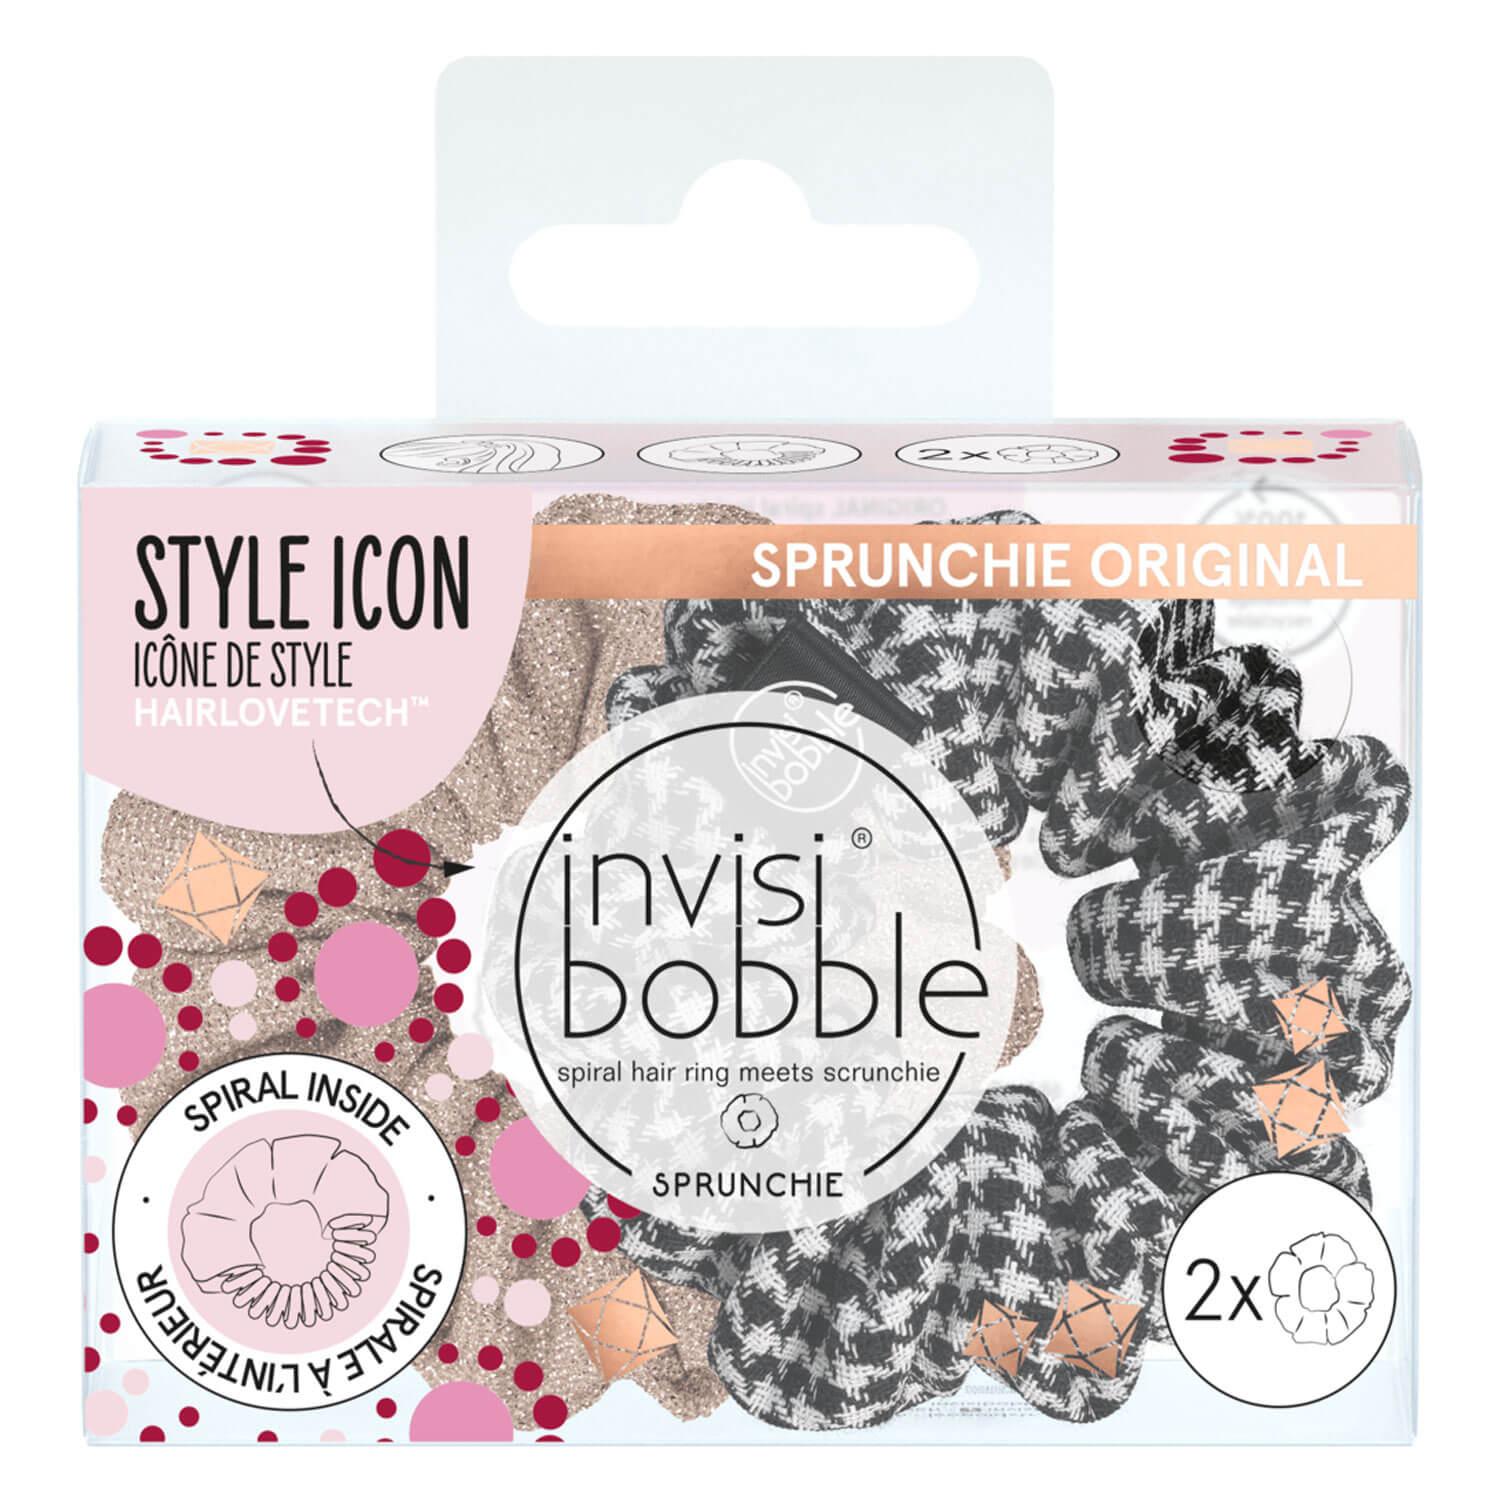 invisibobble SPRUNCHIE - Duo Pack British Royal Ladies who Sprunch